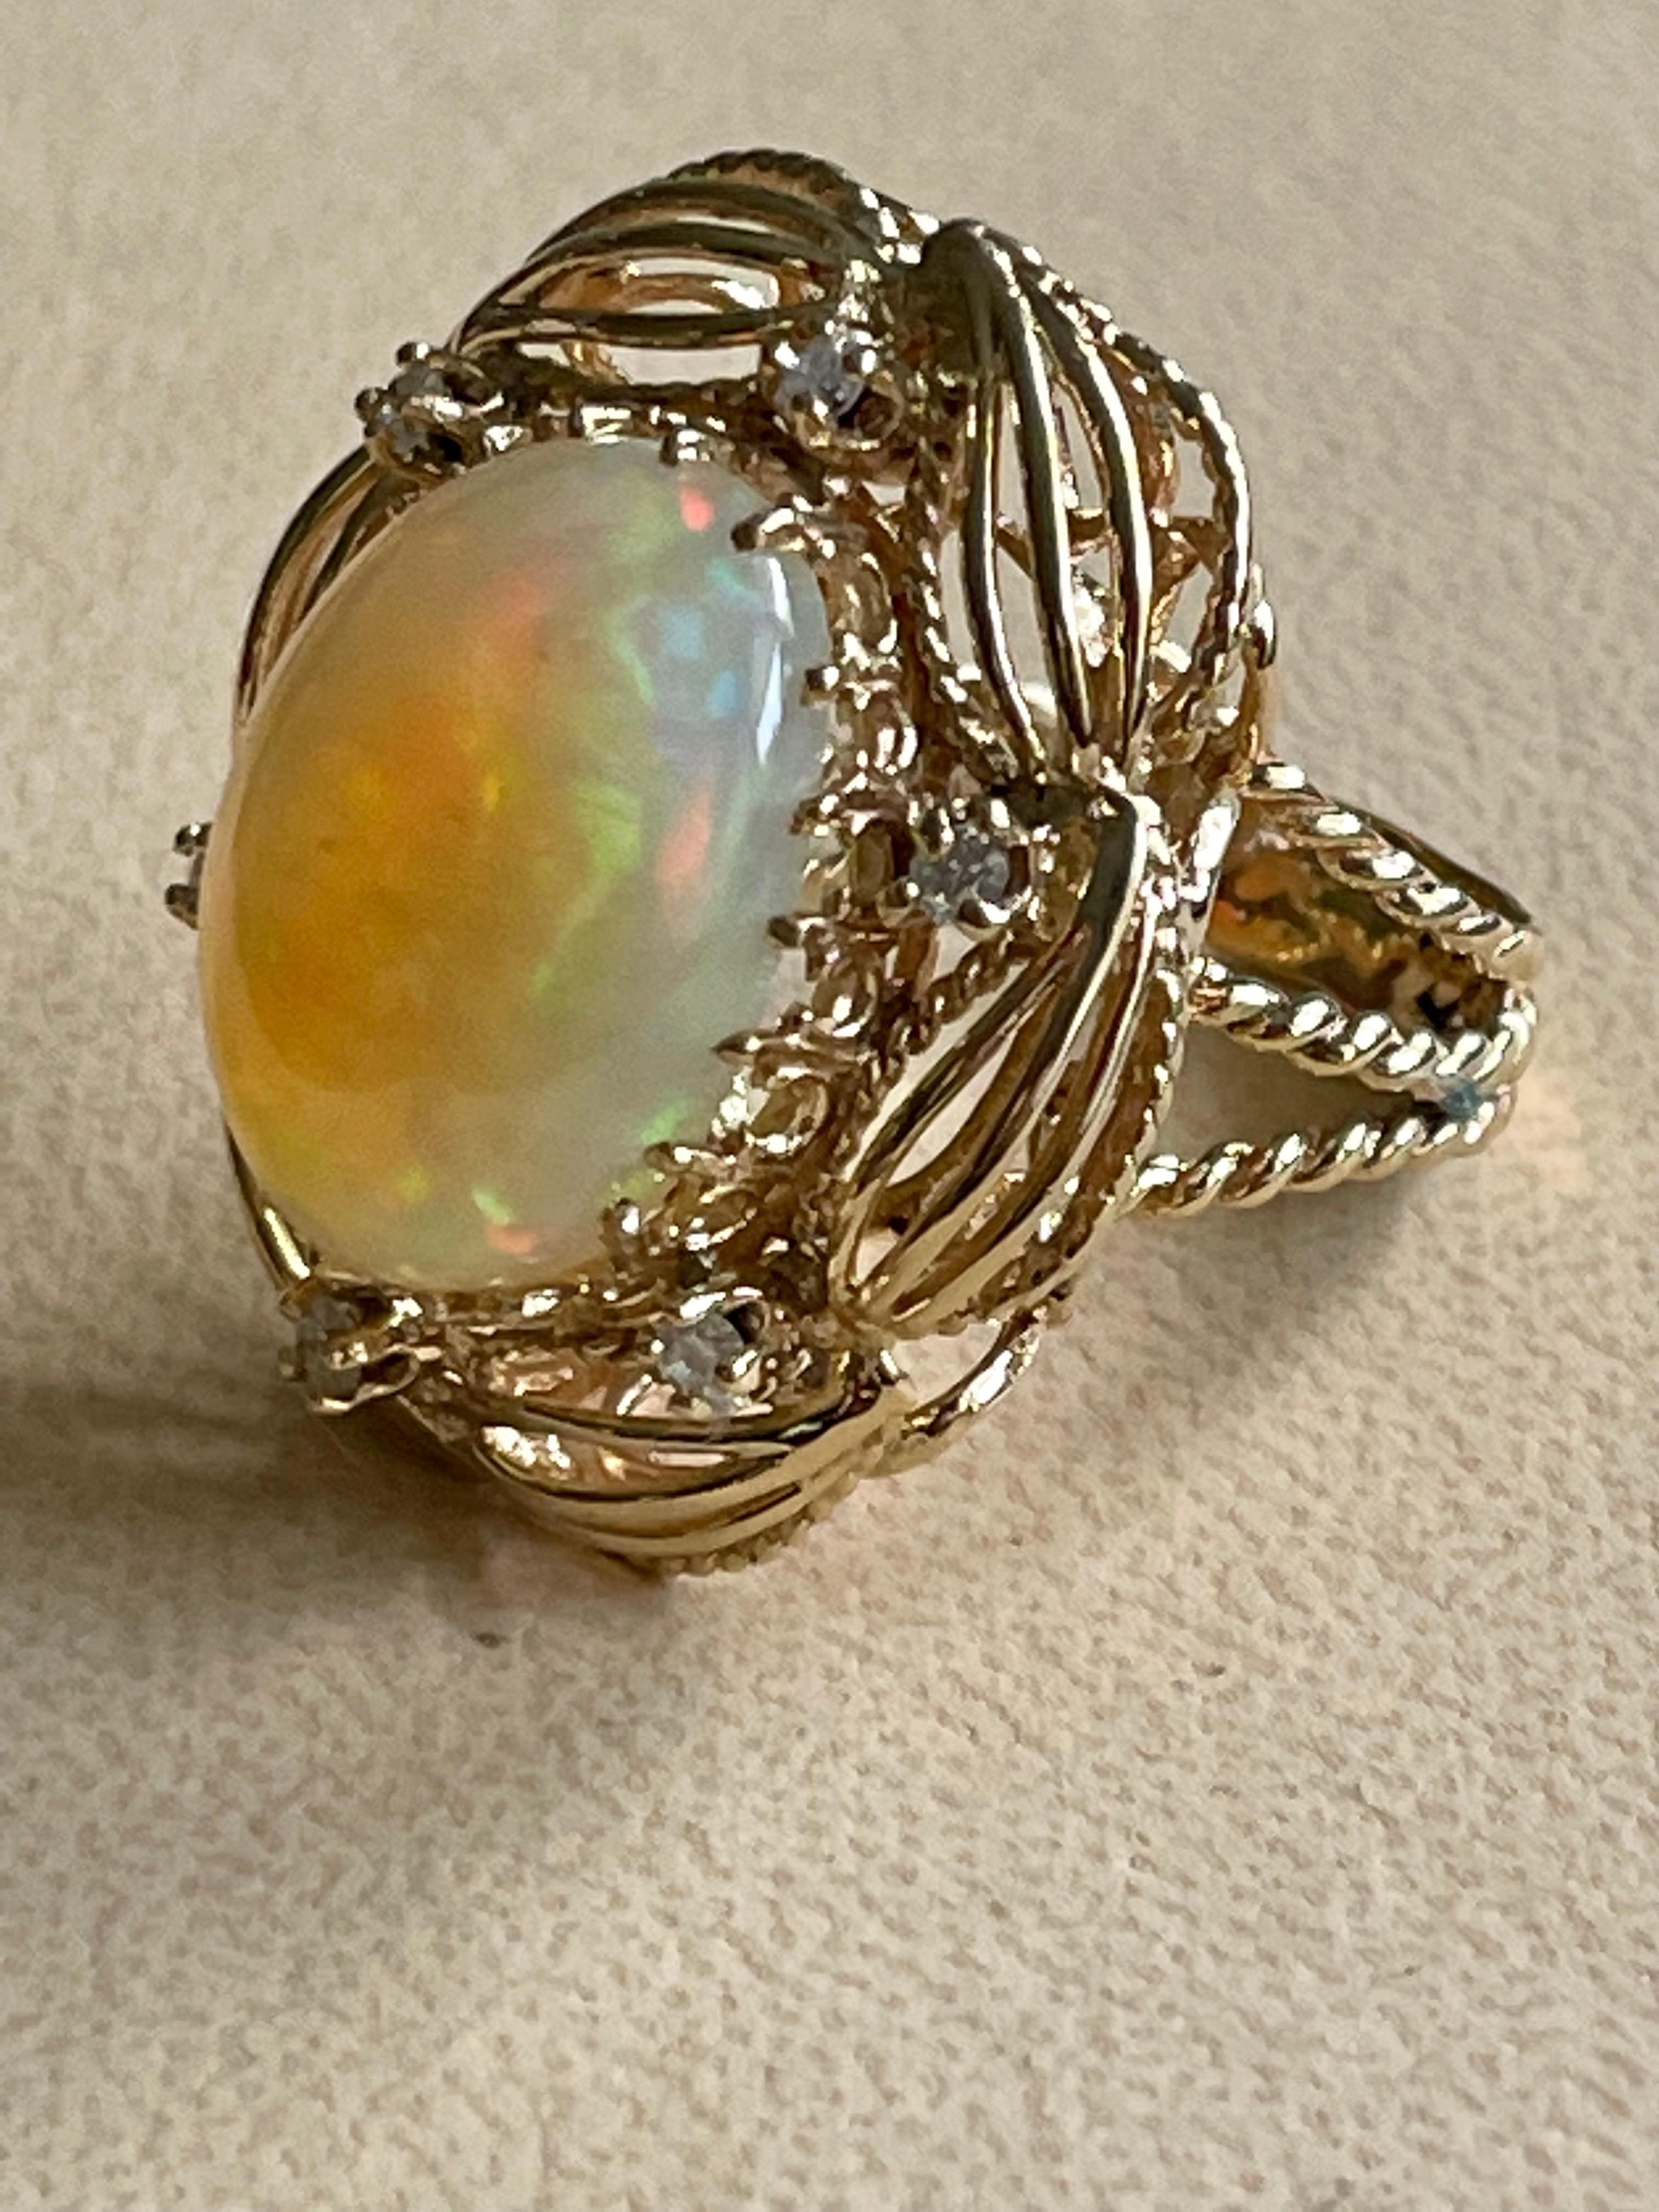 15 Carat Oval Shape Ethiopian Opal Cocktail Ring 14 Karat Yellow Gold Solid Ring For Sale 2